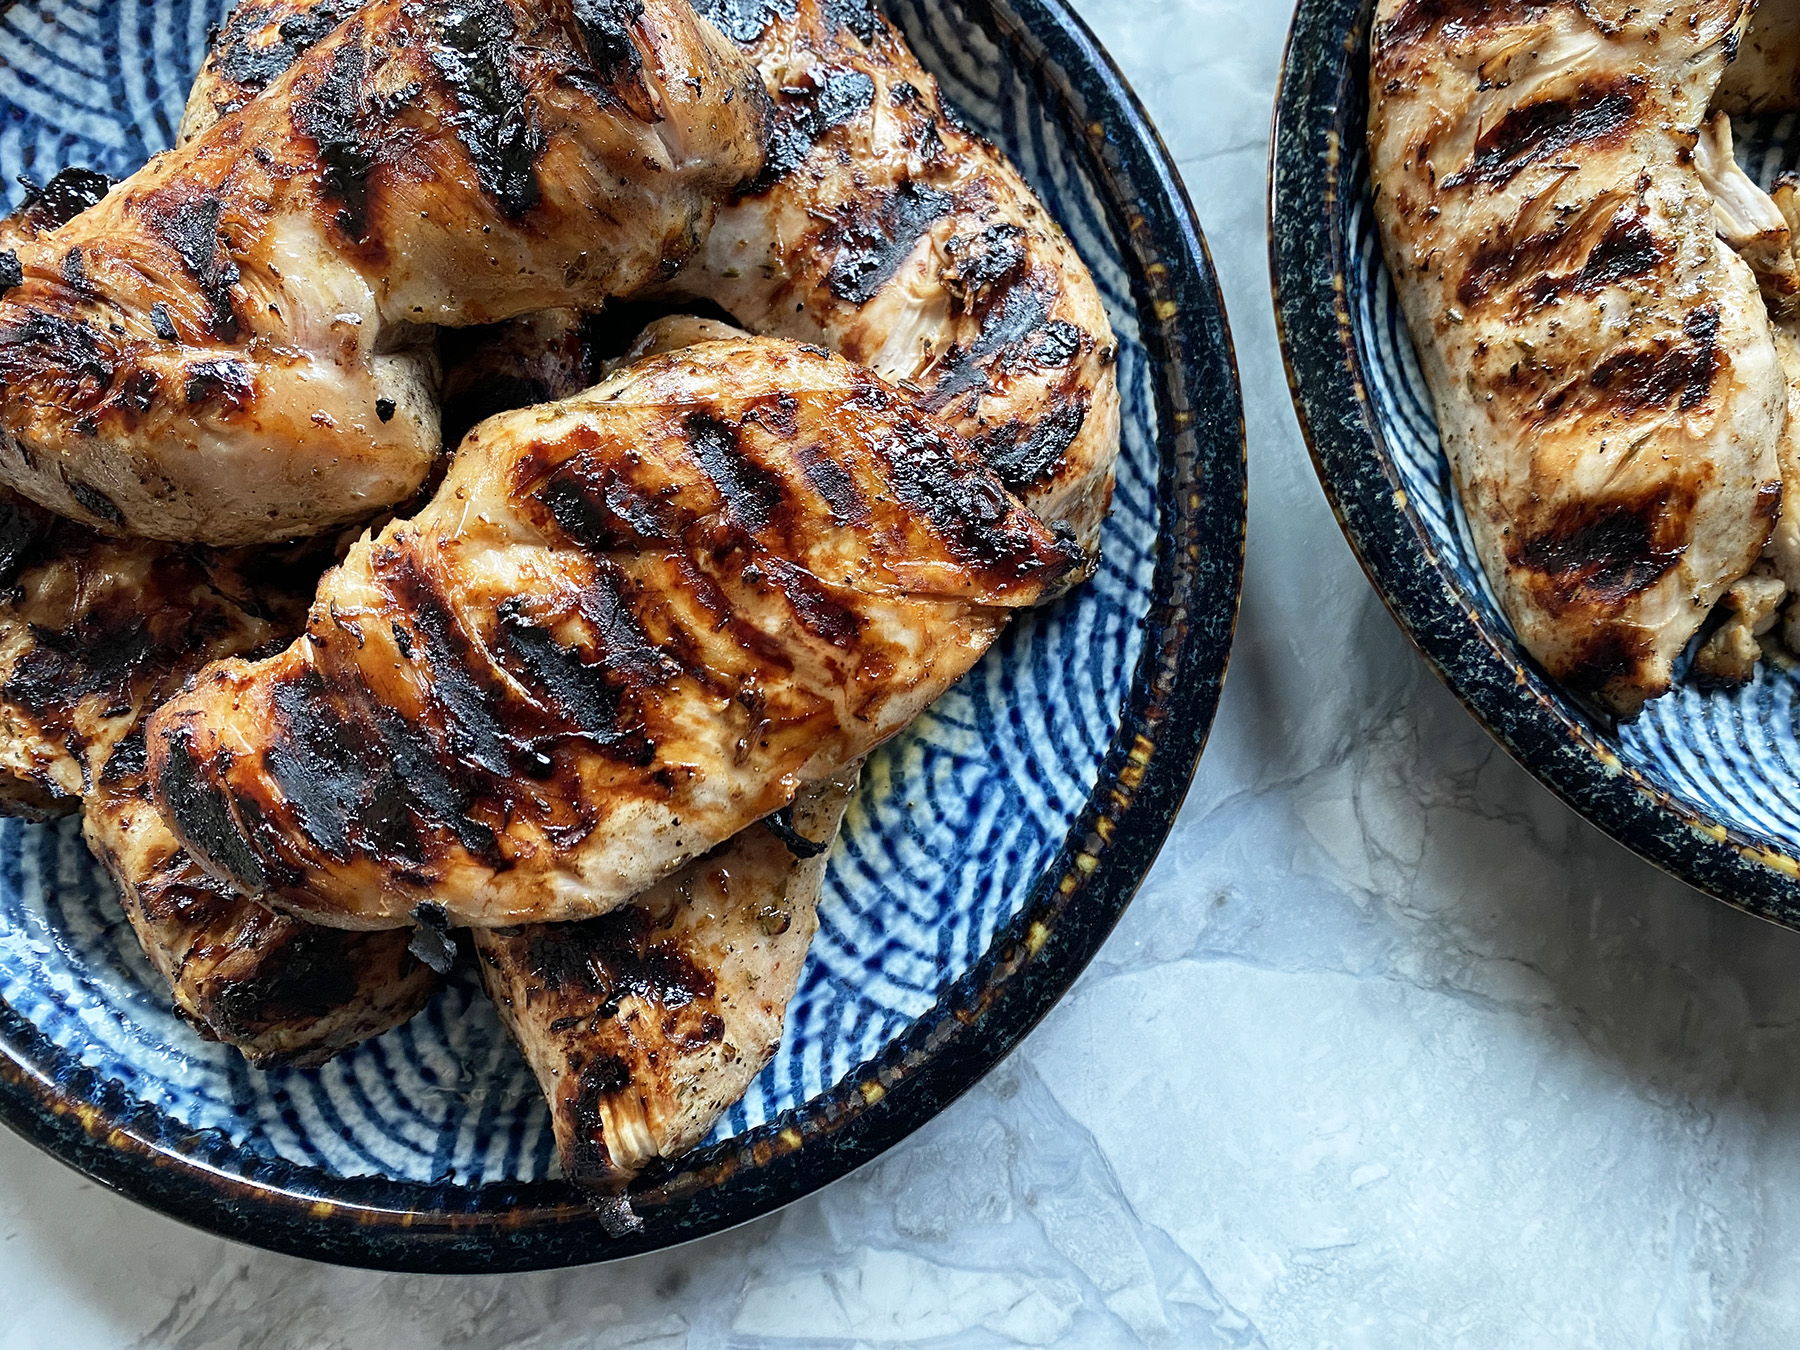 Grilled Chicken (for the freezer!)